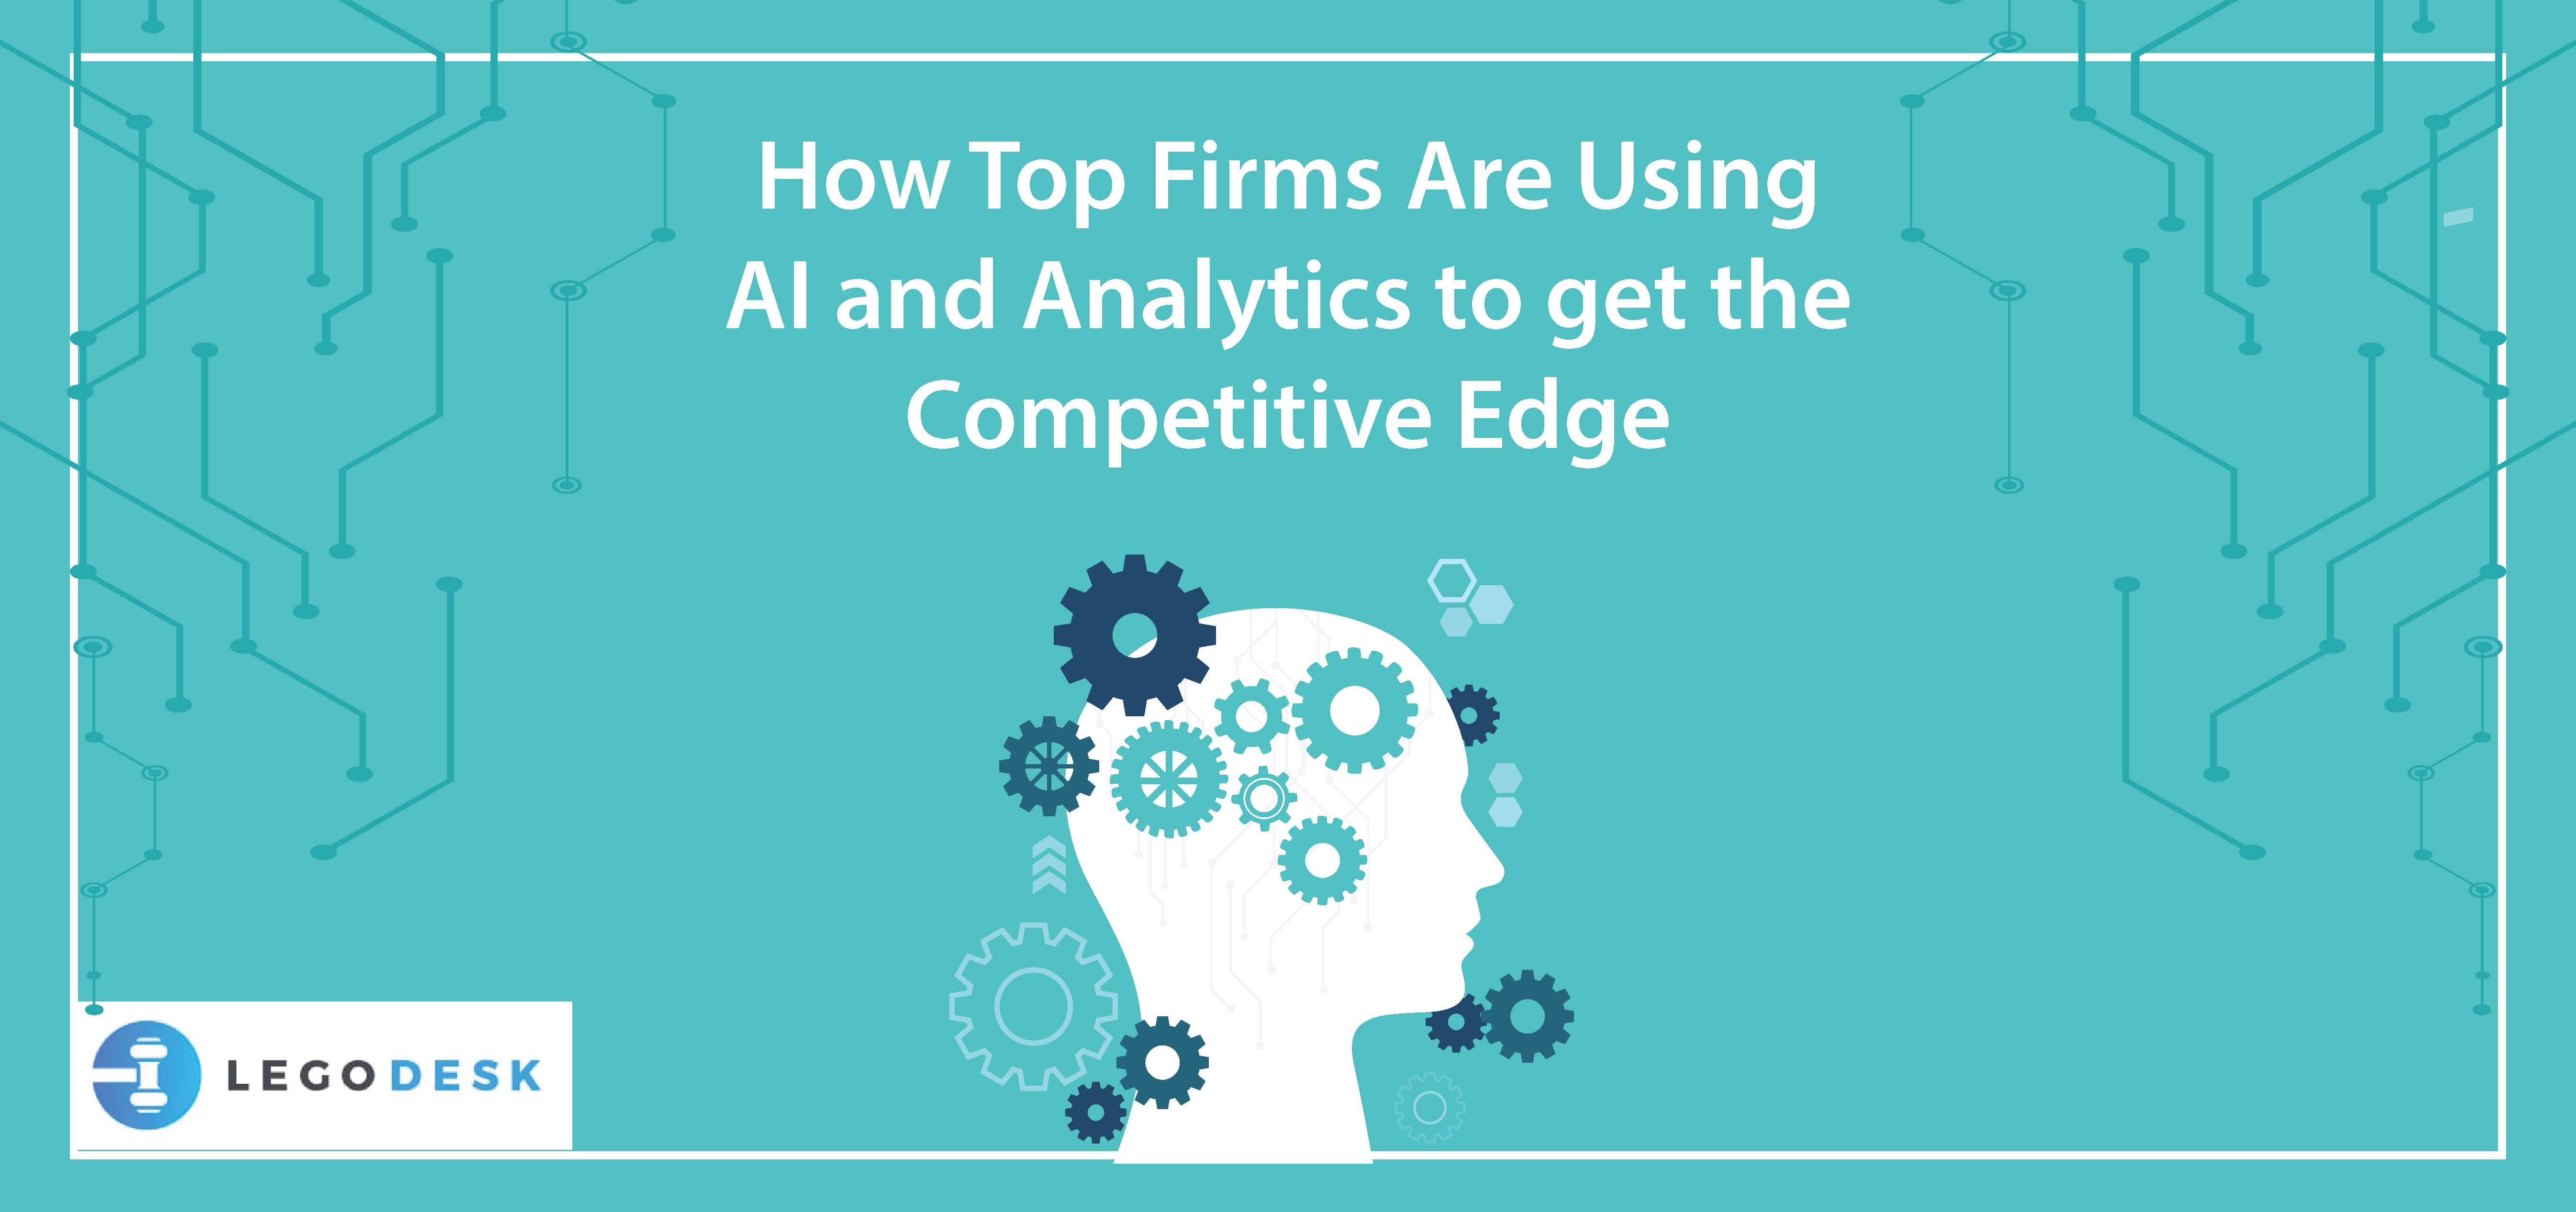 How Top Firms Are Using AI and Analytics to get the Competitive Edge